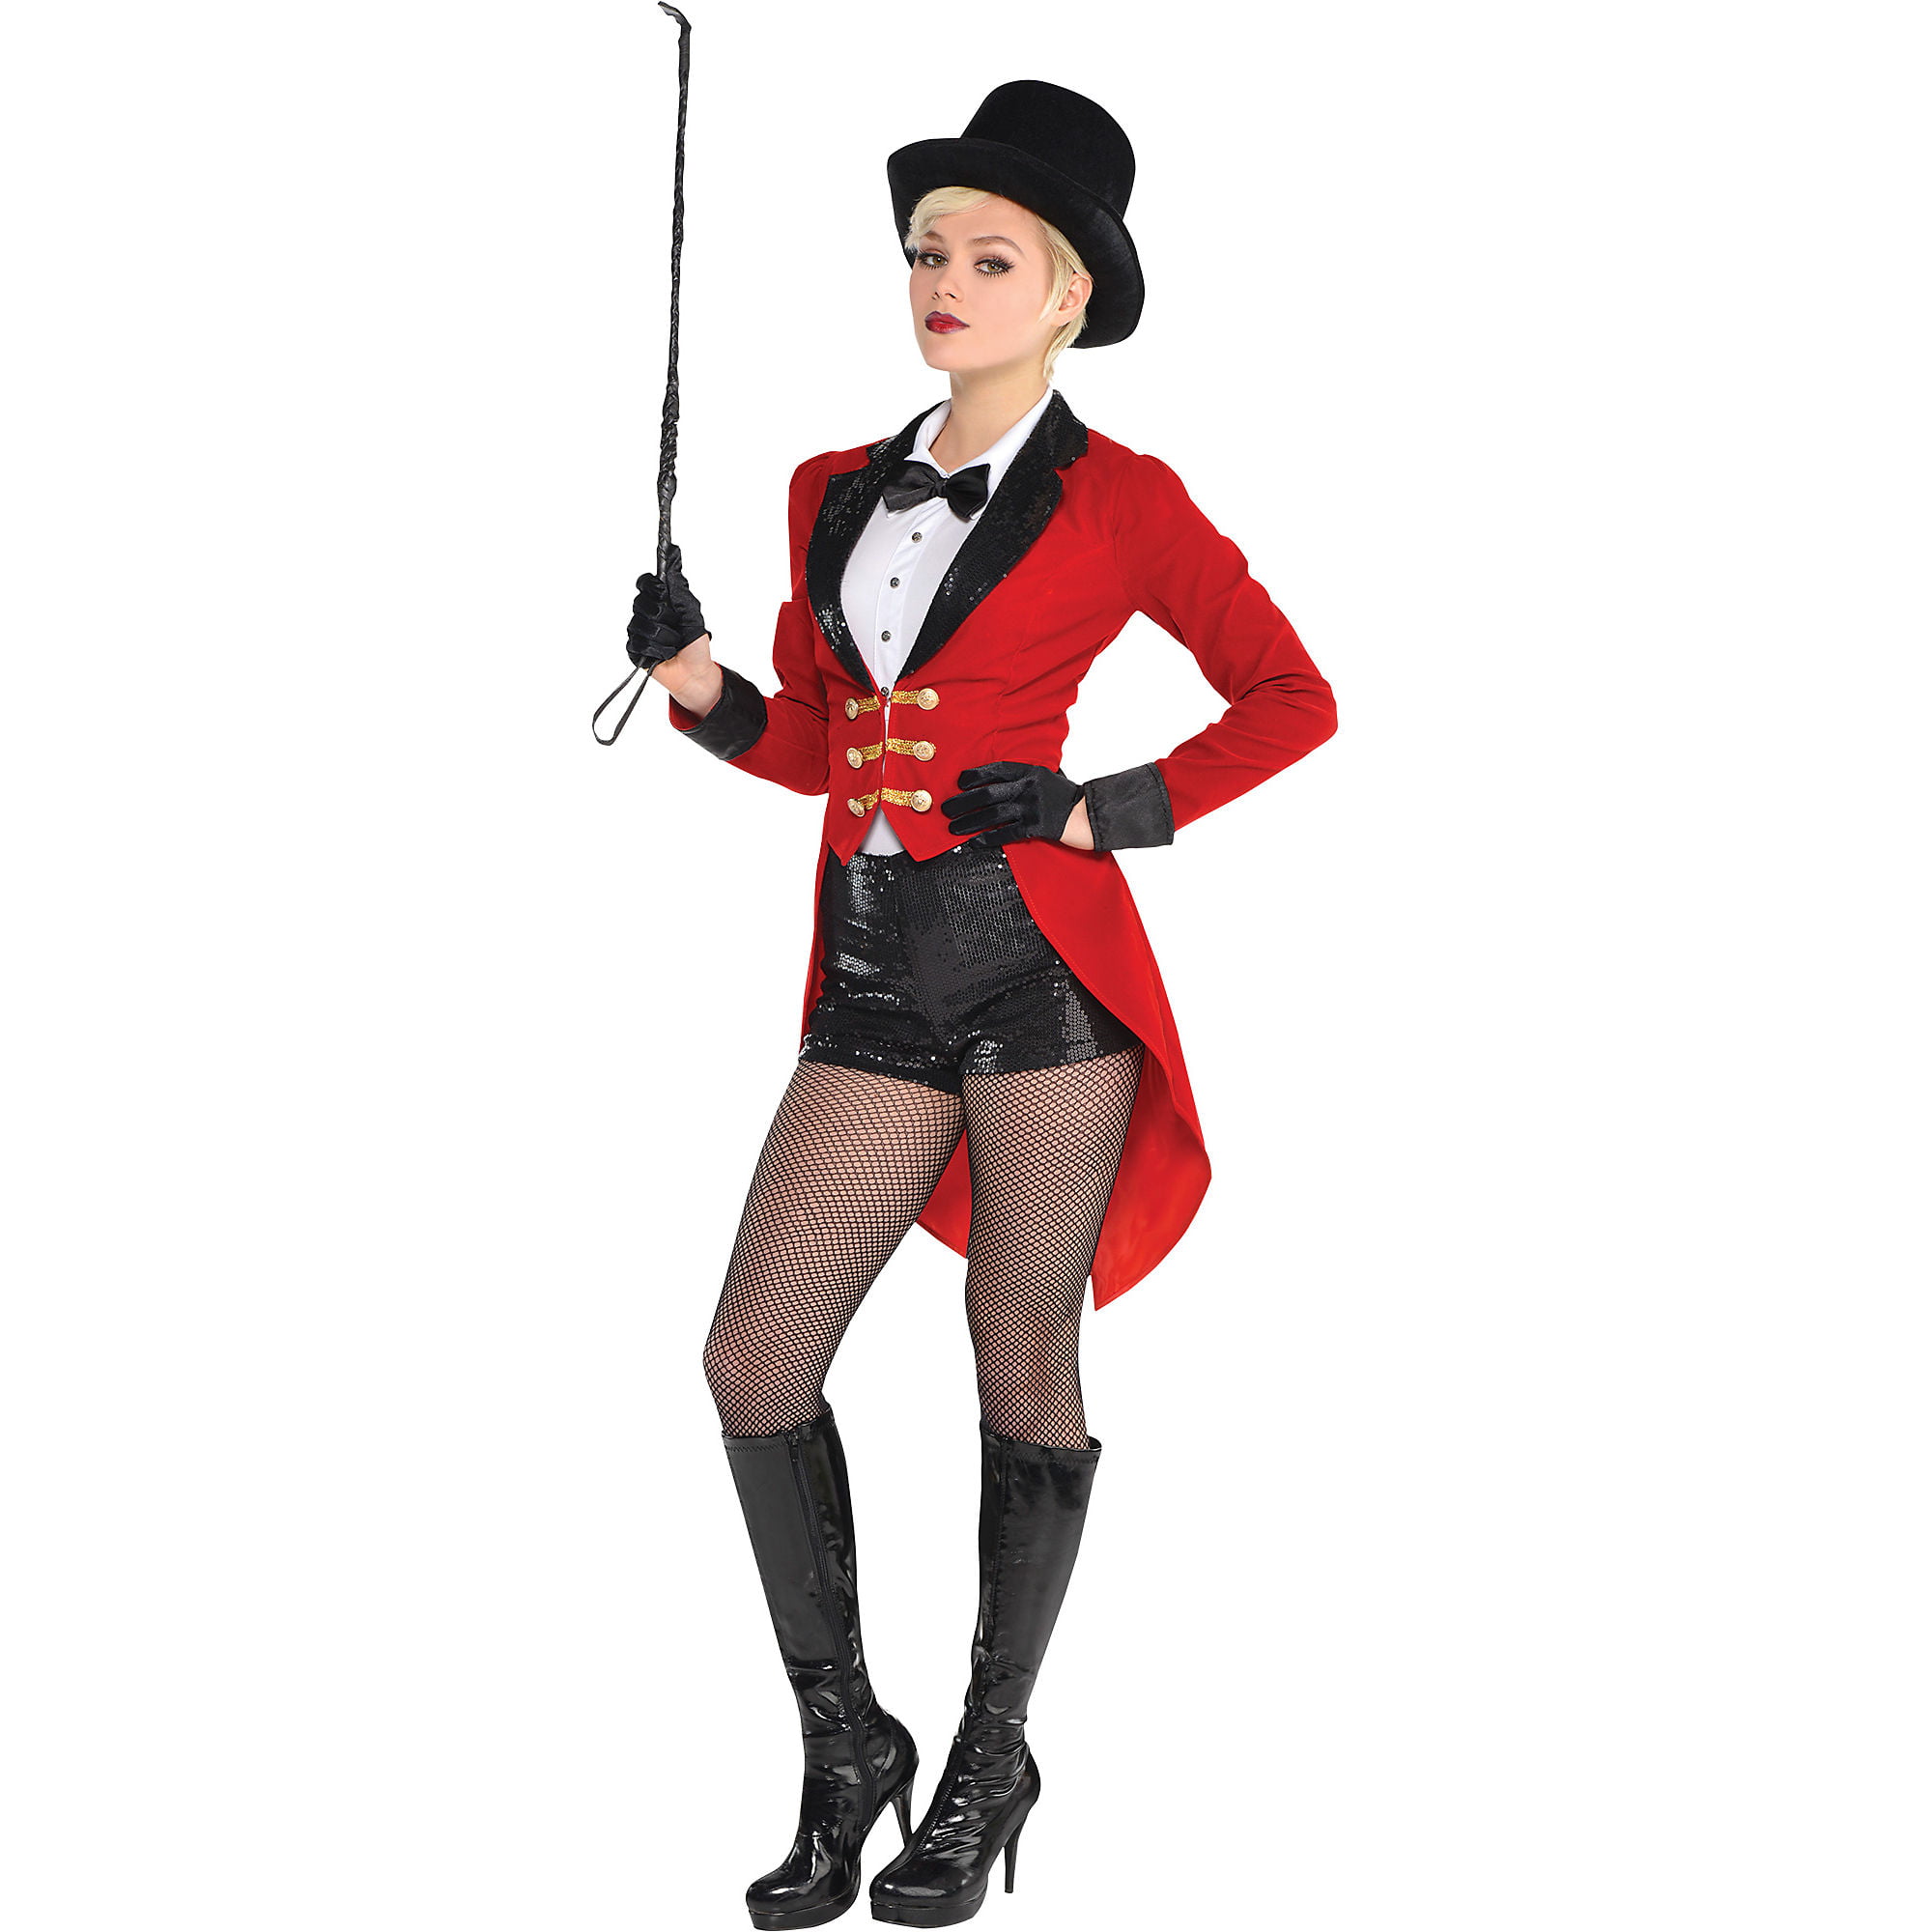 Dazzling Ringmaster The Greatest Showman Inspired Adult Costume 